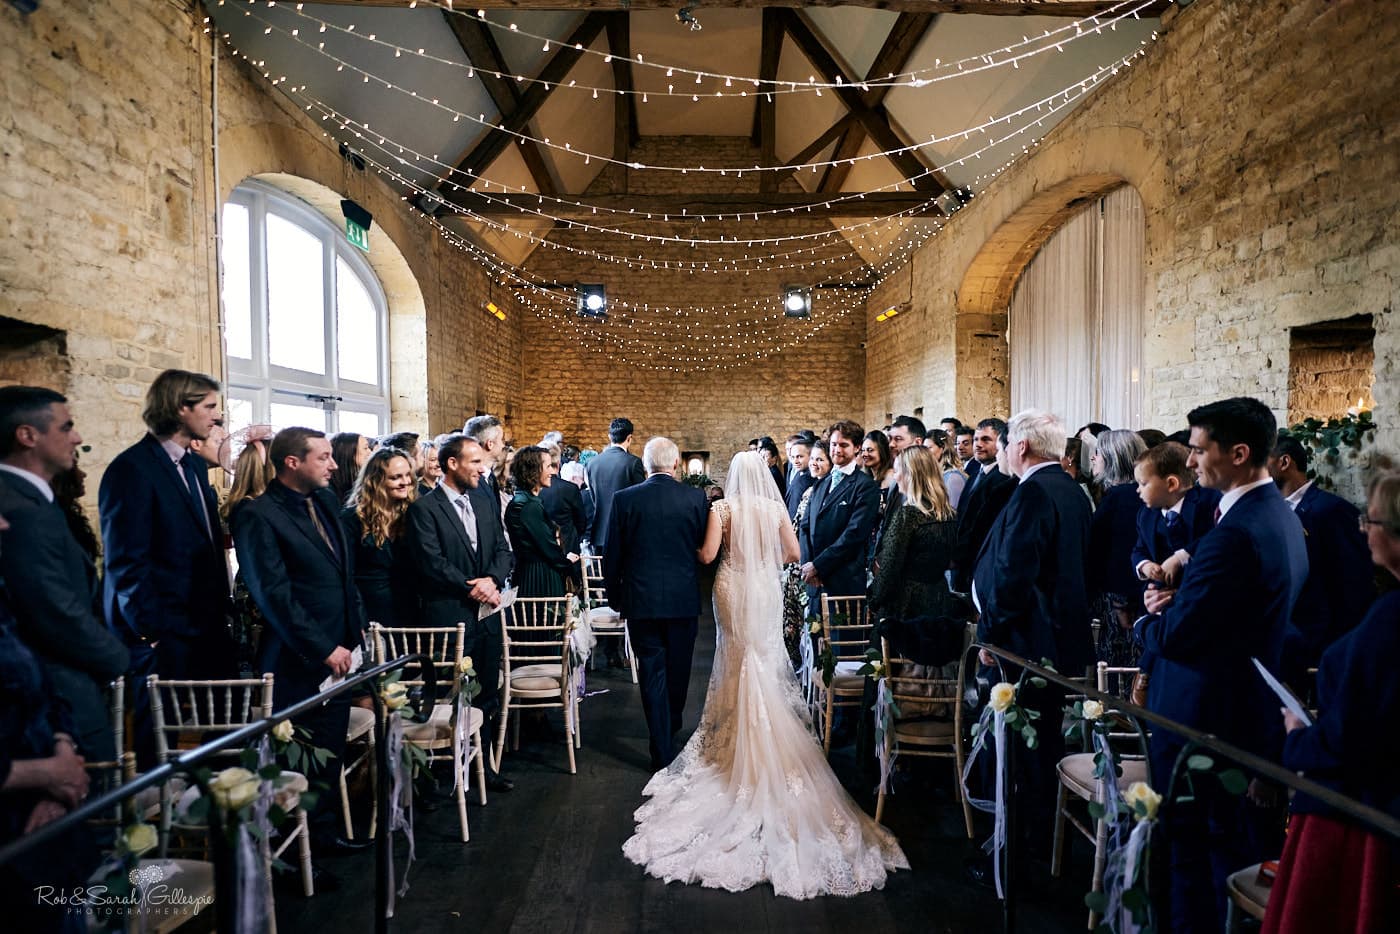 Bride and father walk up aisle at Lapstone Barn wedding ceremony